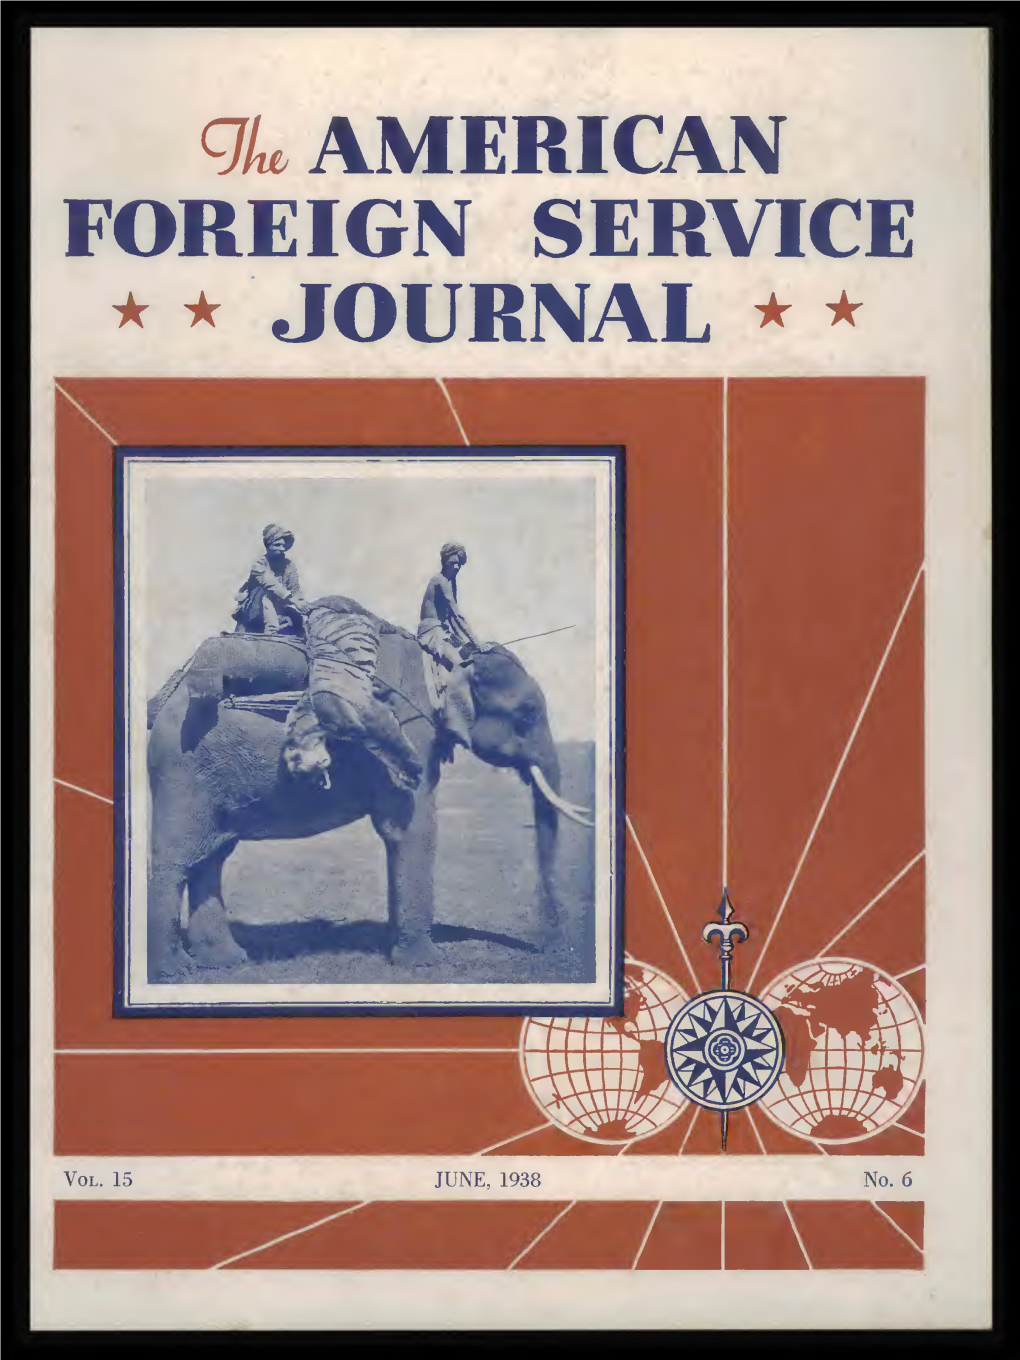 The Foreign Service Journal, June 1938